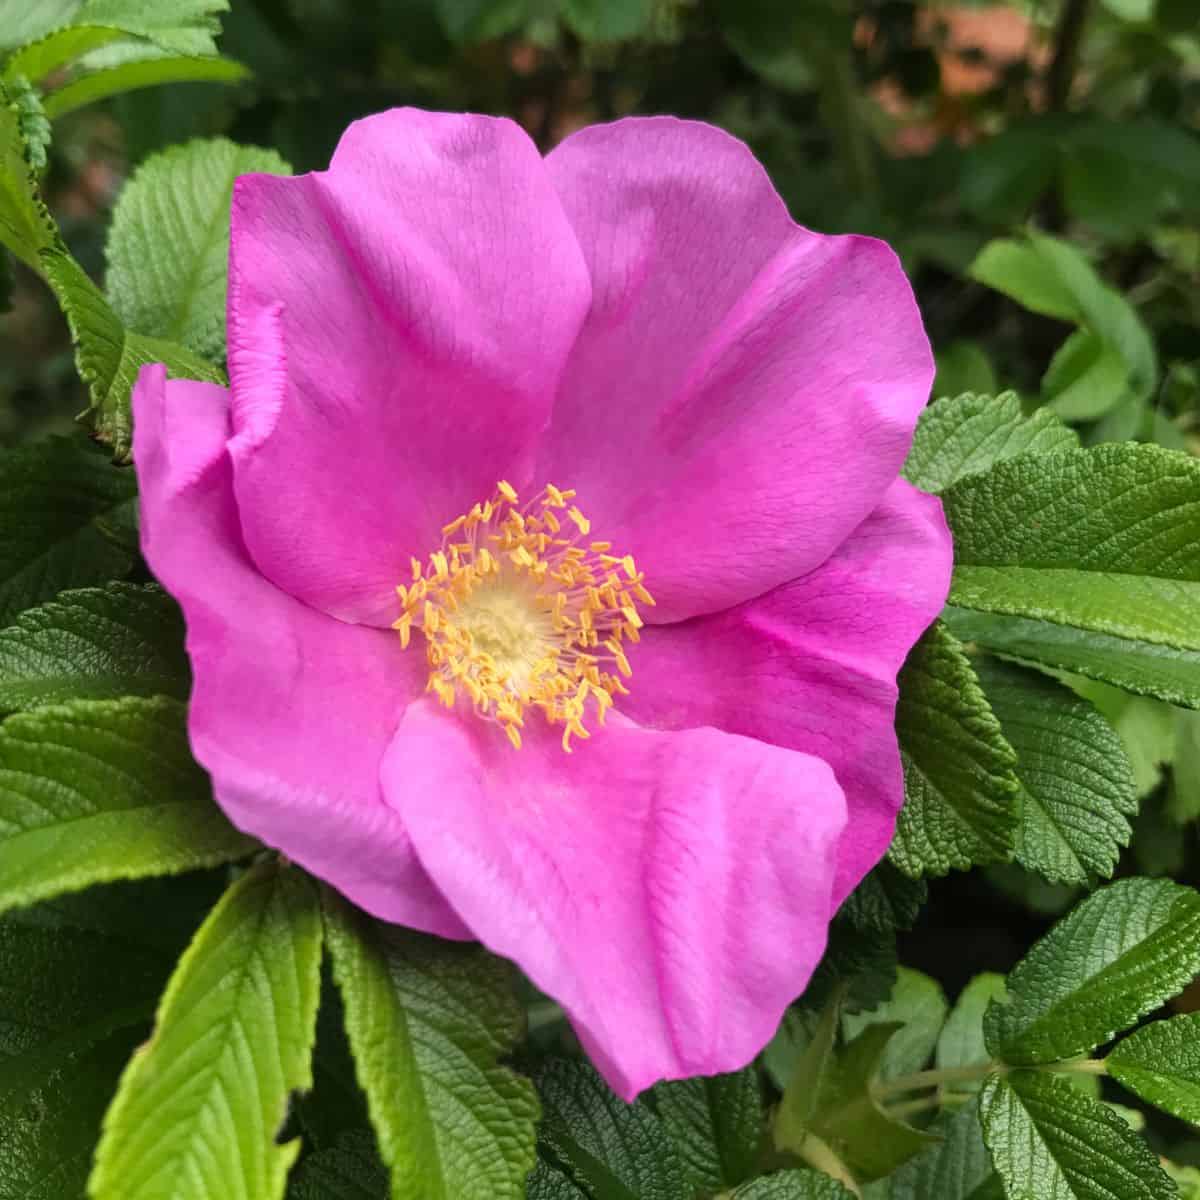 Close up of a single ragusa rose flower on the bush with leaves surrounding it.